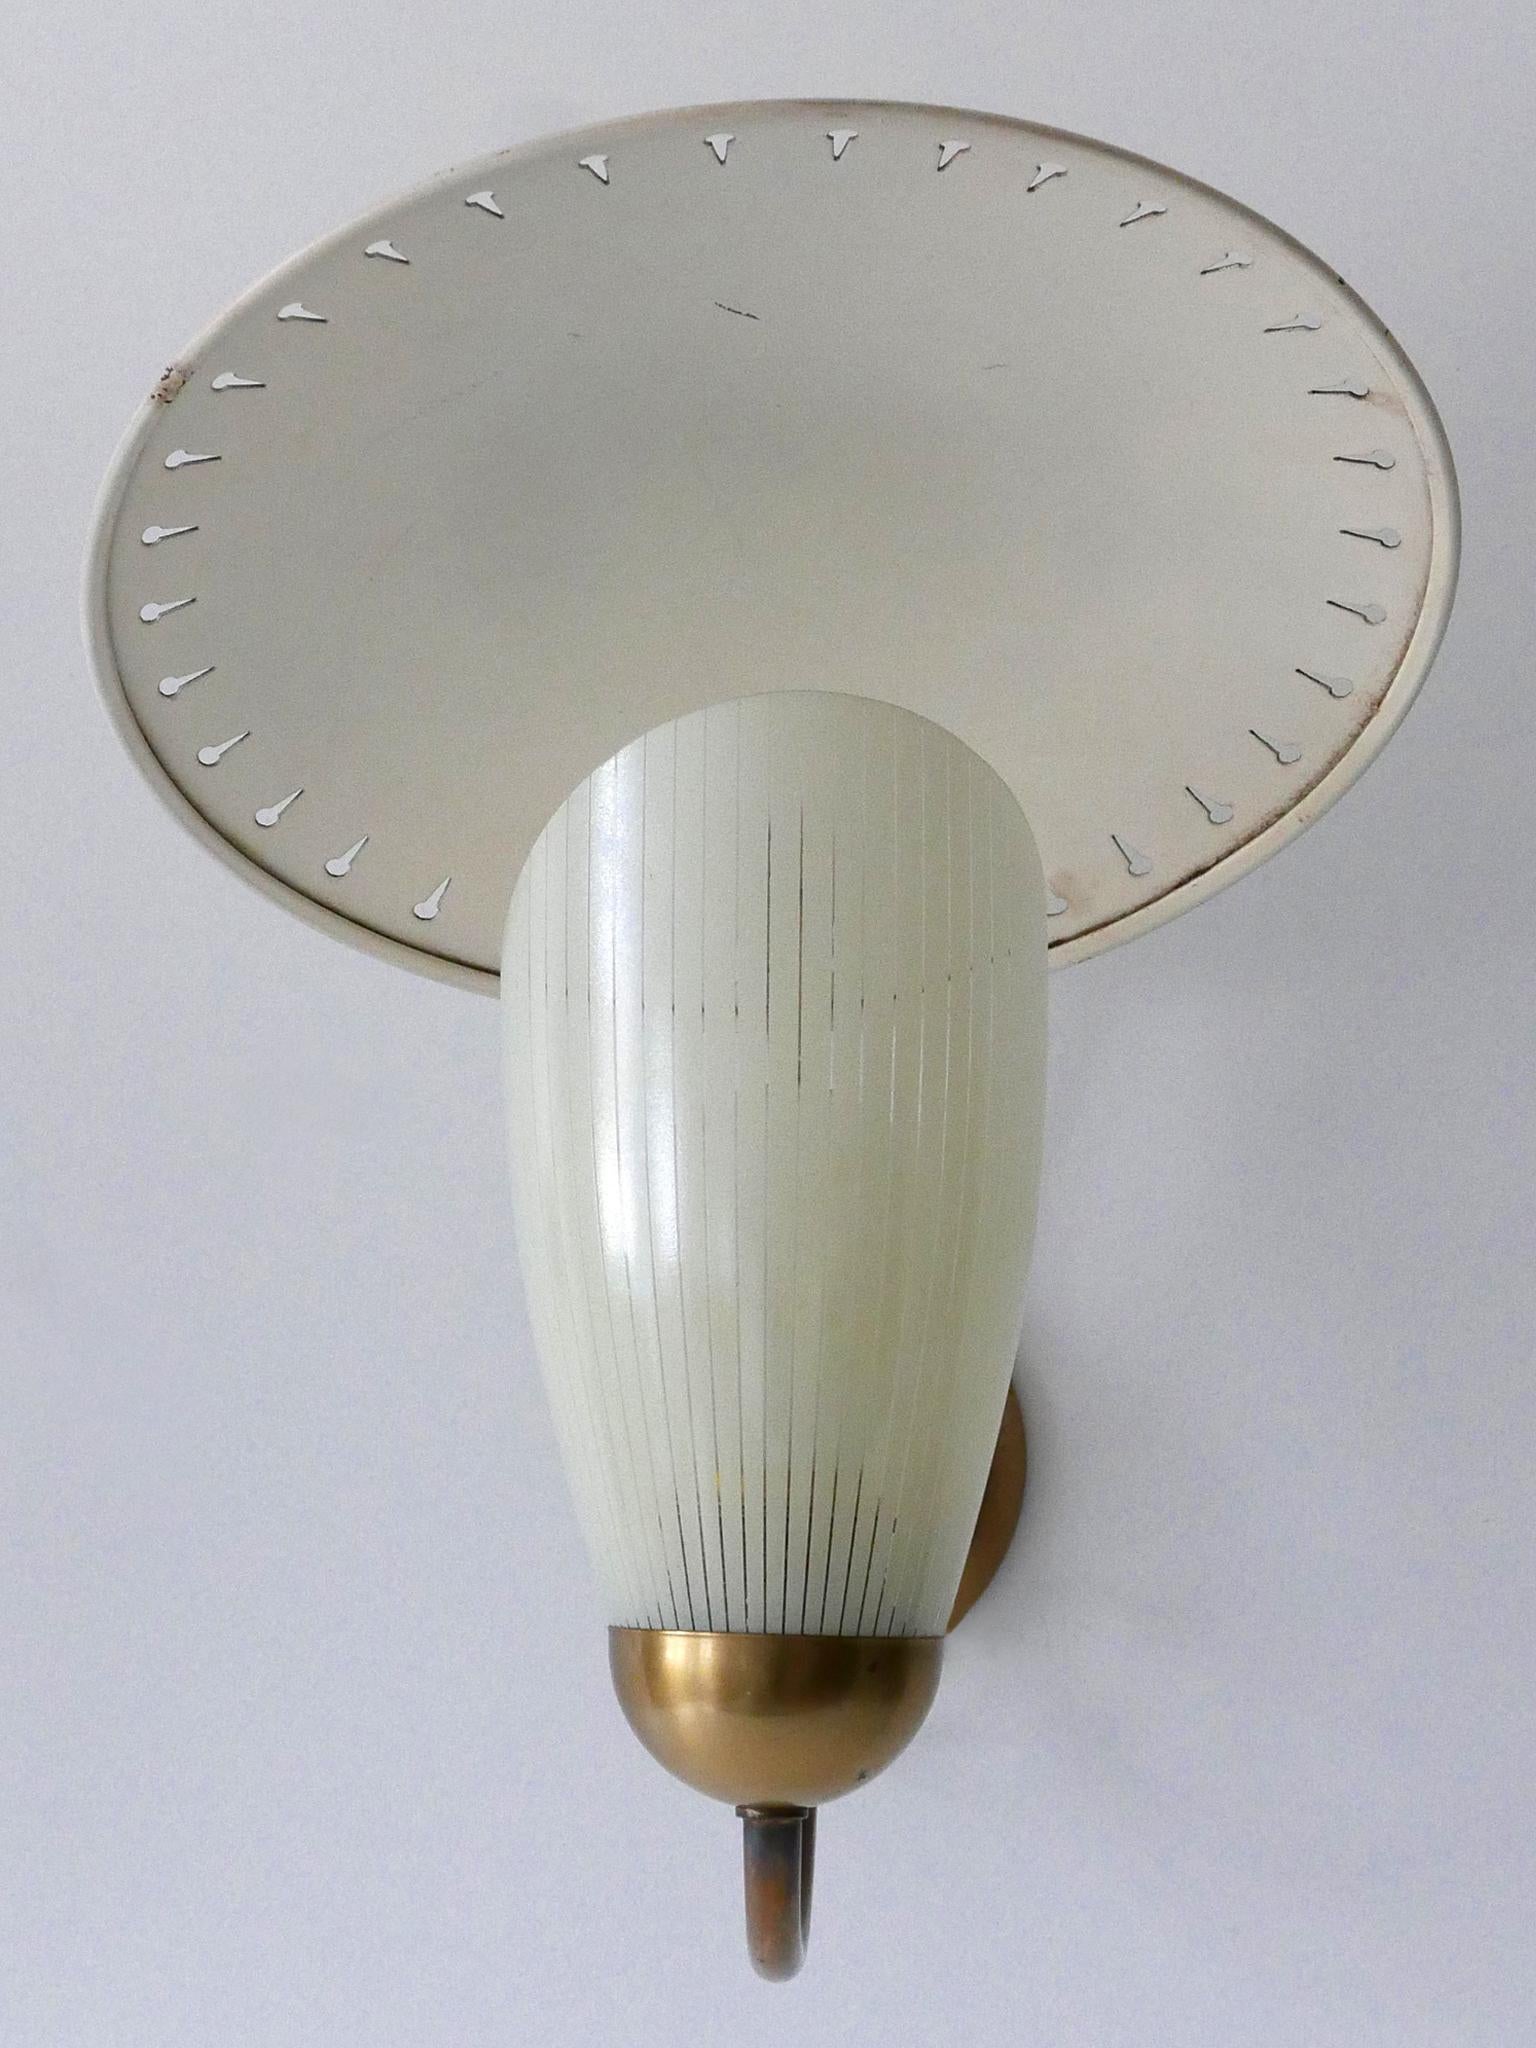 Set of Two Rare Mid-Century Modern Sputnik Sconces or Wall Lights Germany 1950s For Sale 6